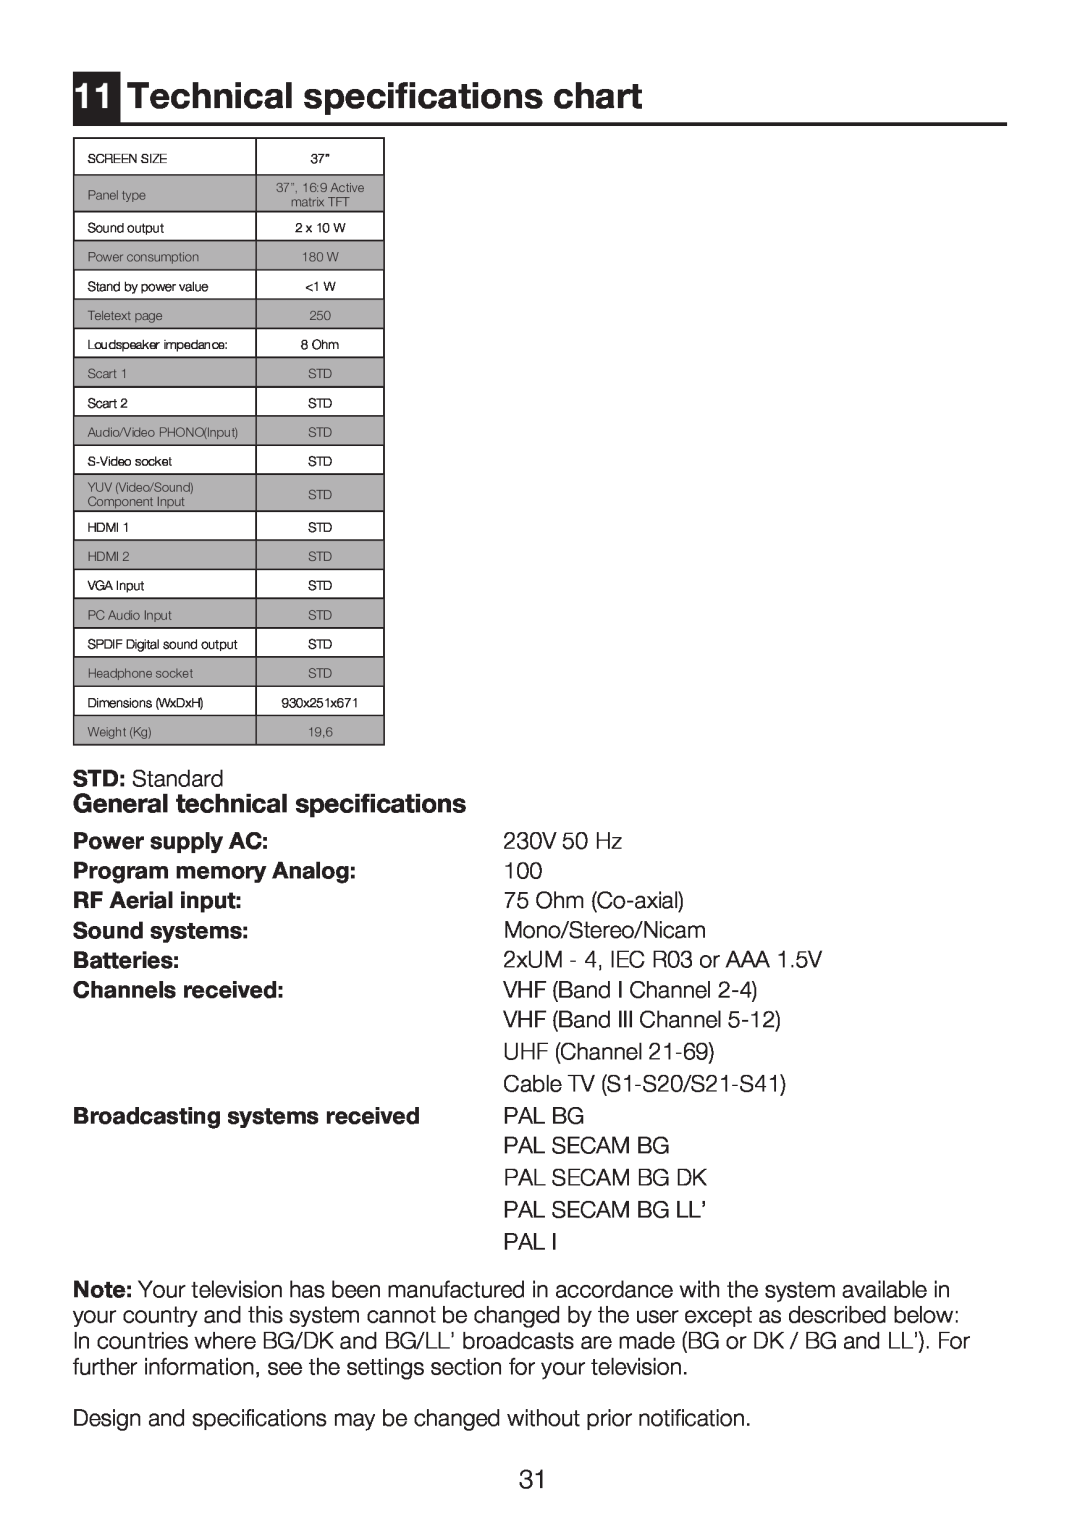 Beko 37WLU550FHID Technical specifications chart, General technical specifications, Power supply AC, Program memory Analog 